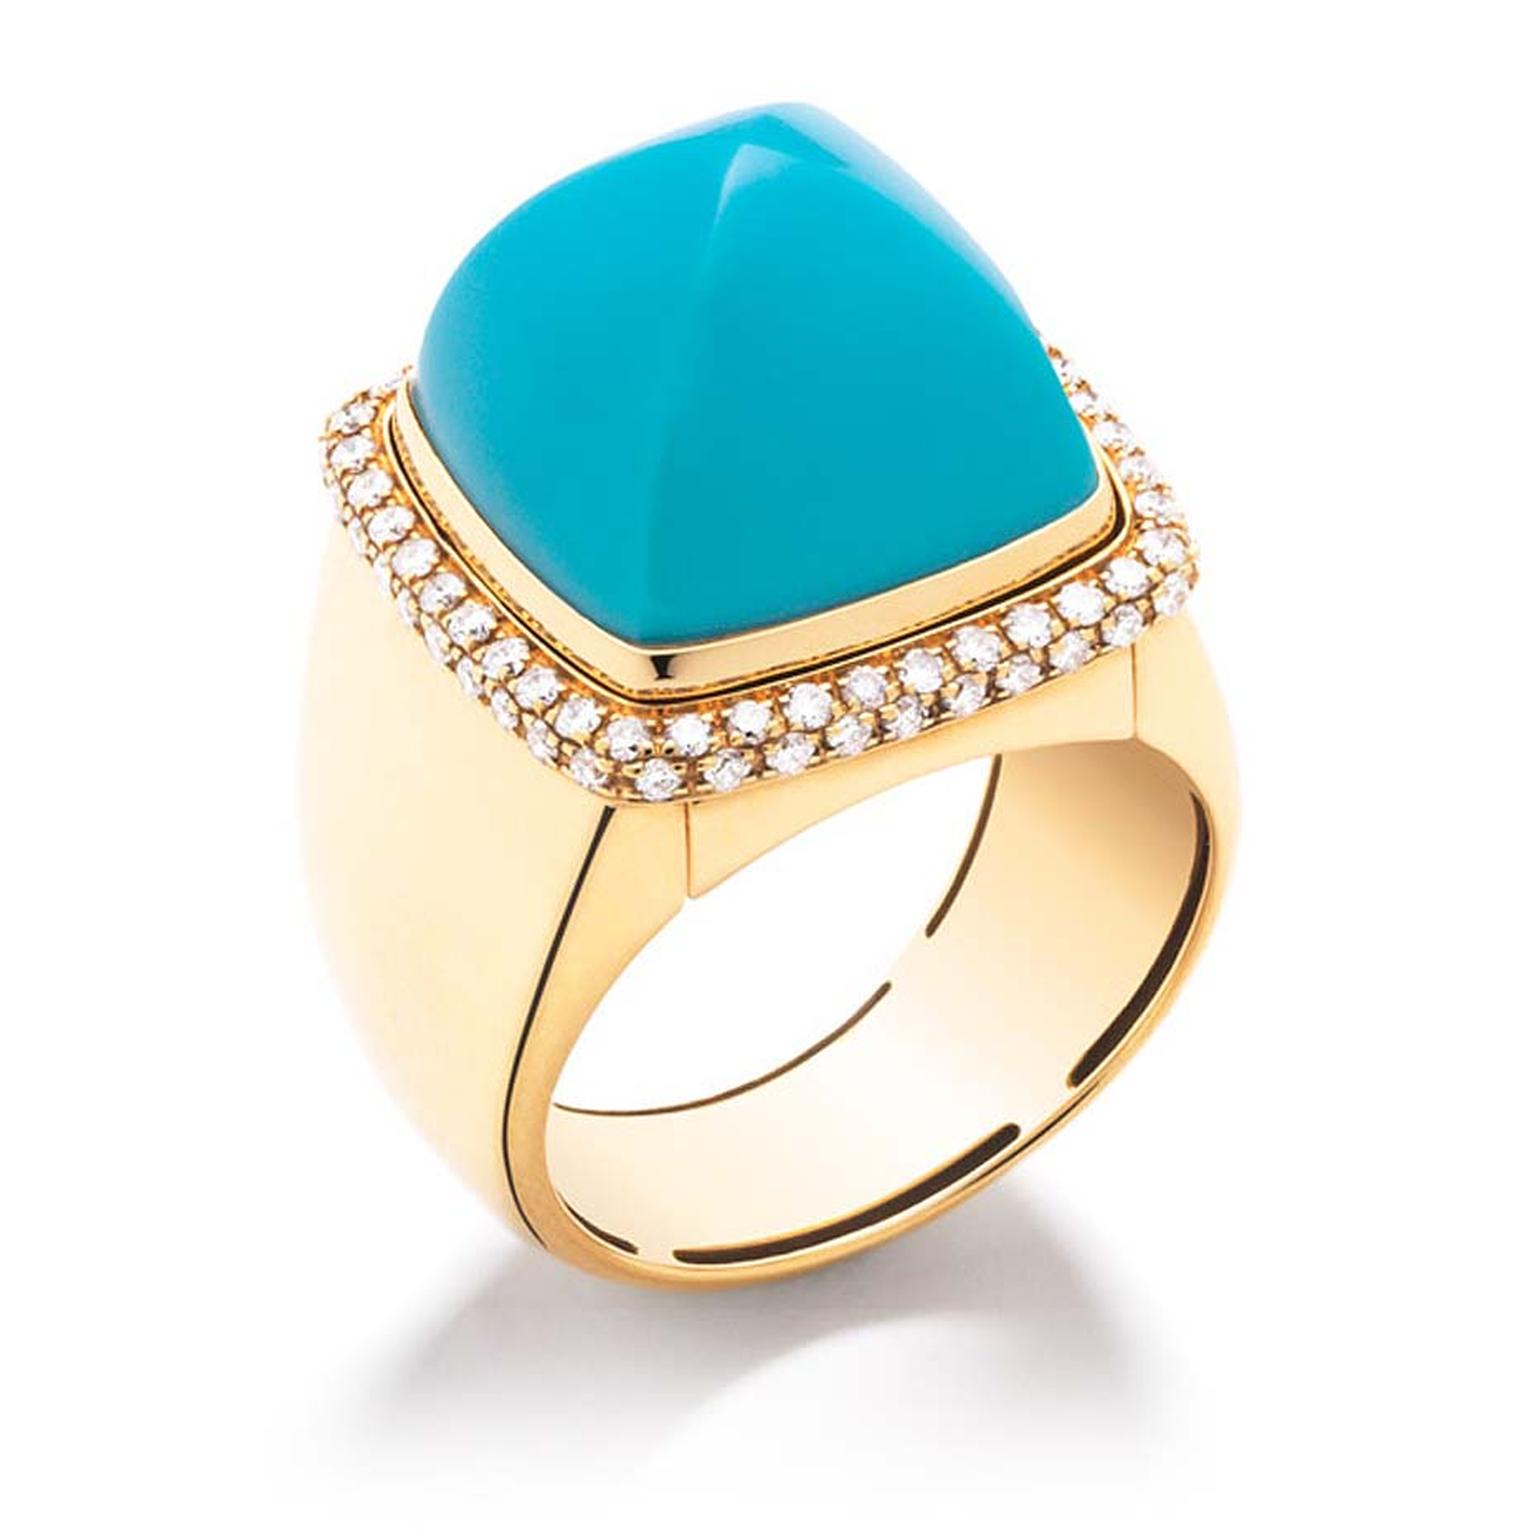 Mother’s Day ideas: fine jewellery emboldened with coloured gemstones to brighten her special day